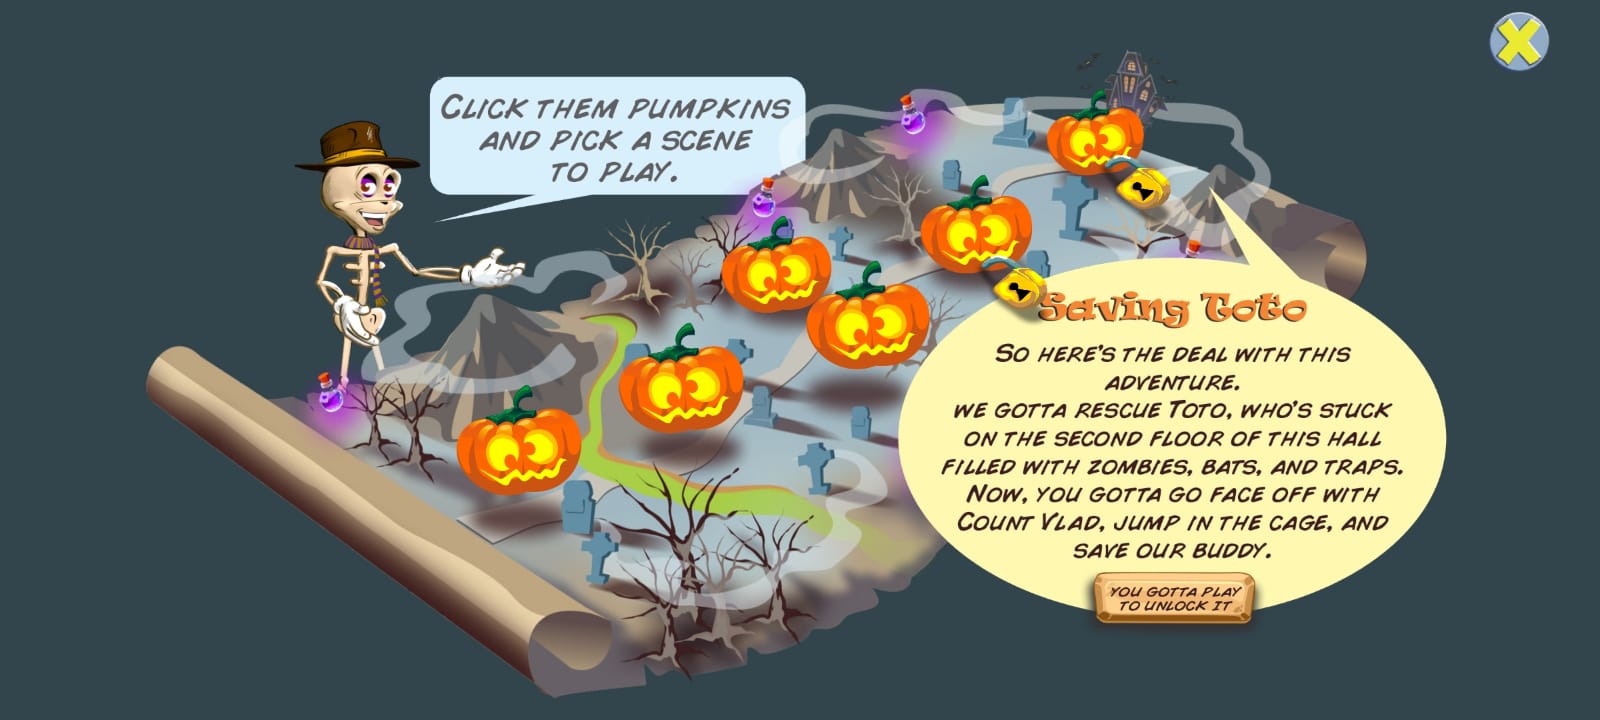 Full version of Android Quests game apk Pumpkins Quest for tablet and phone.